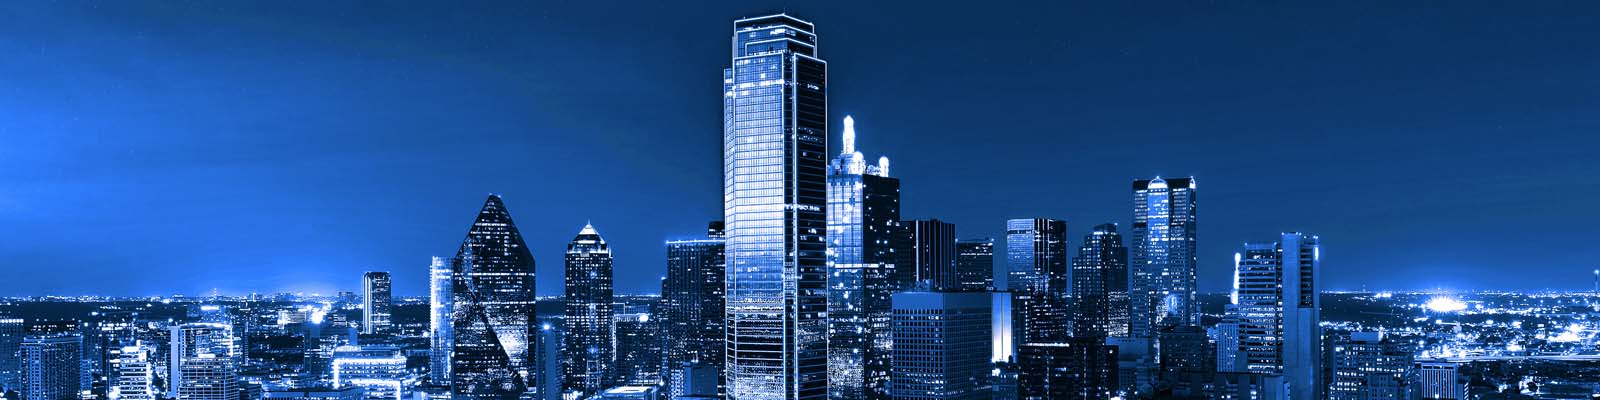 ASTA-USA provides professional and certified translation services in Dallas, Texas. Contact us now.